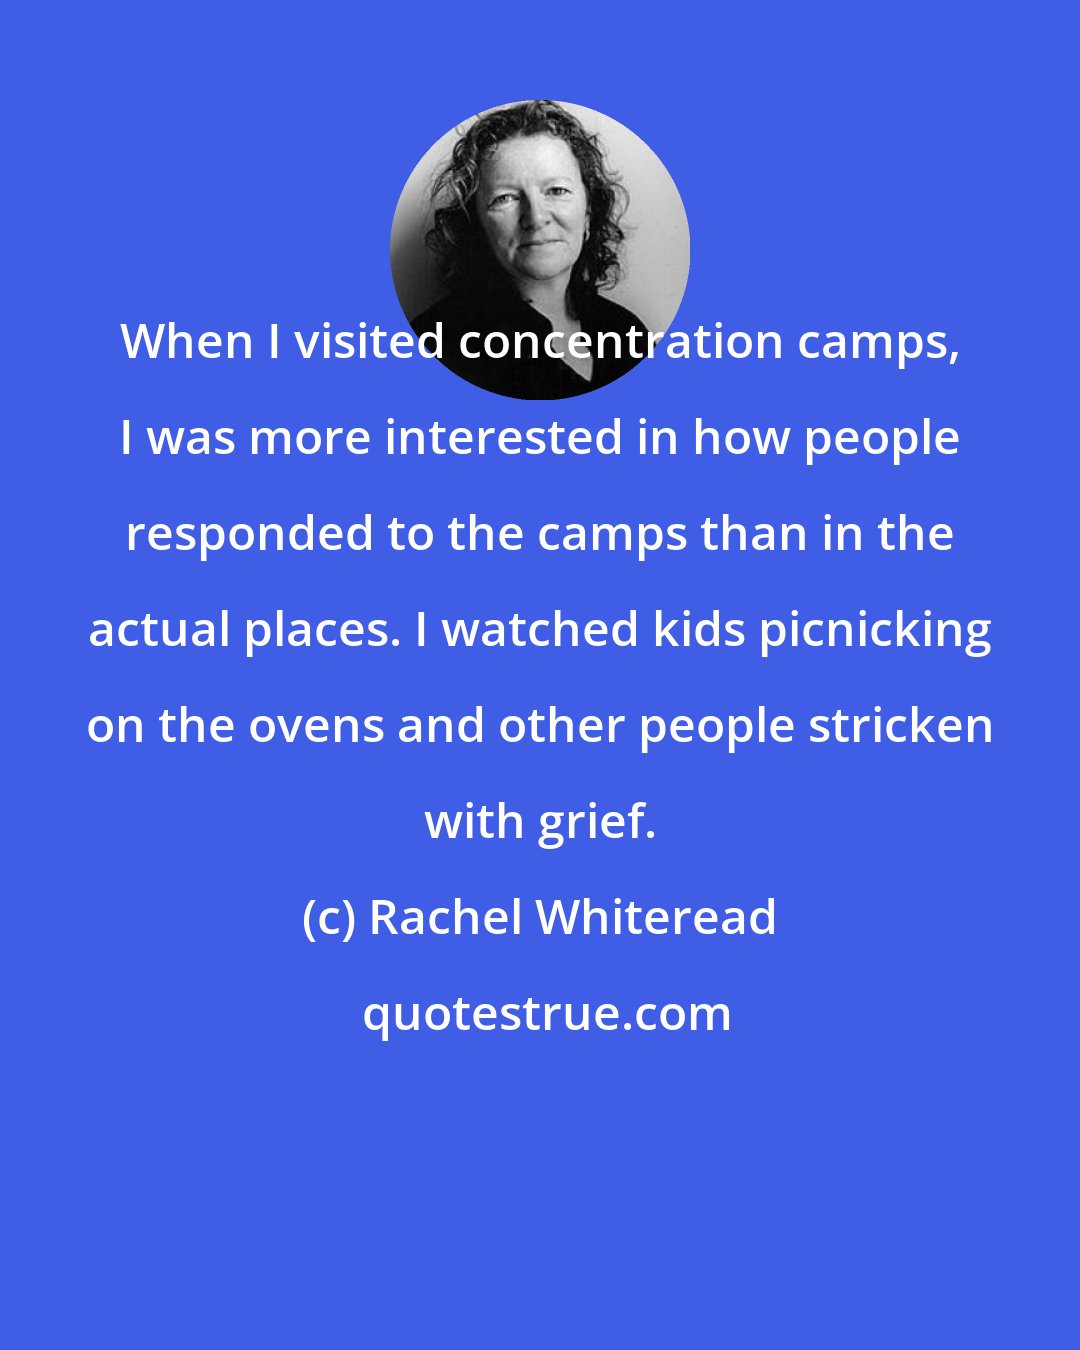 Rachel Whiteread: When I visited concentration camps, I was more interested in how people responded to the camps than in the actual places. I watched kids picnicking on the ovens and other people stricken with grief.